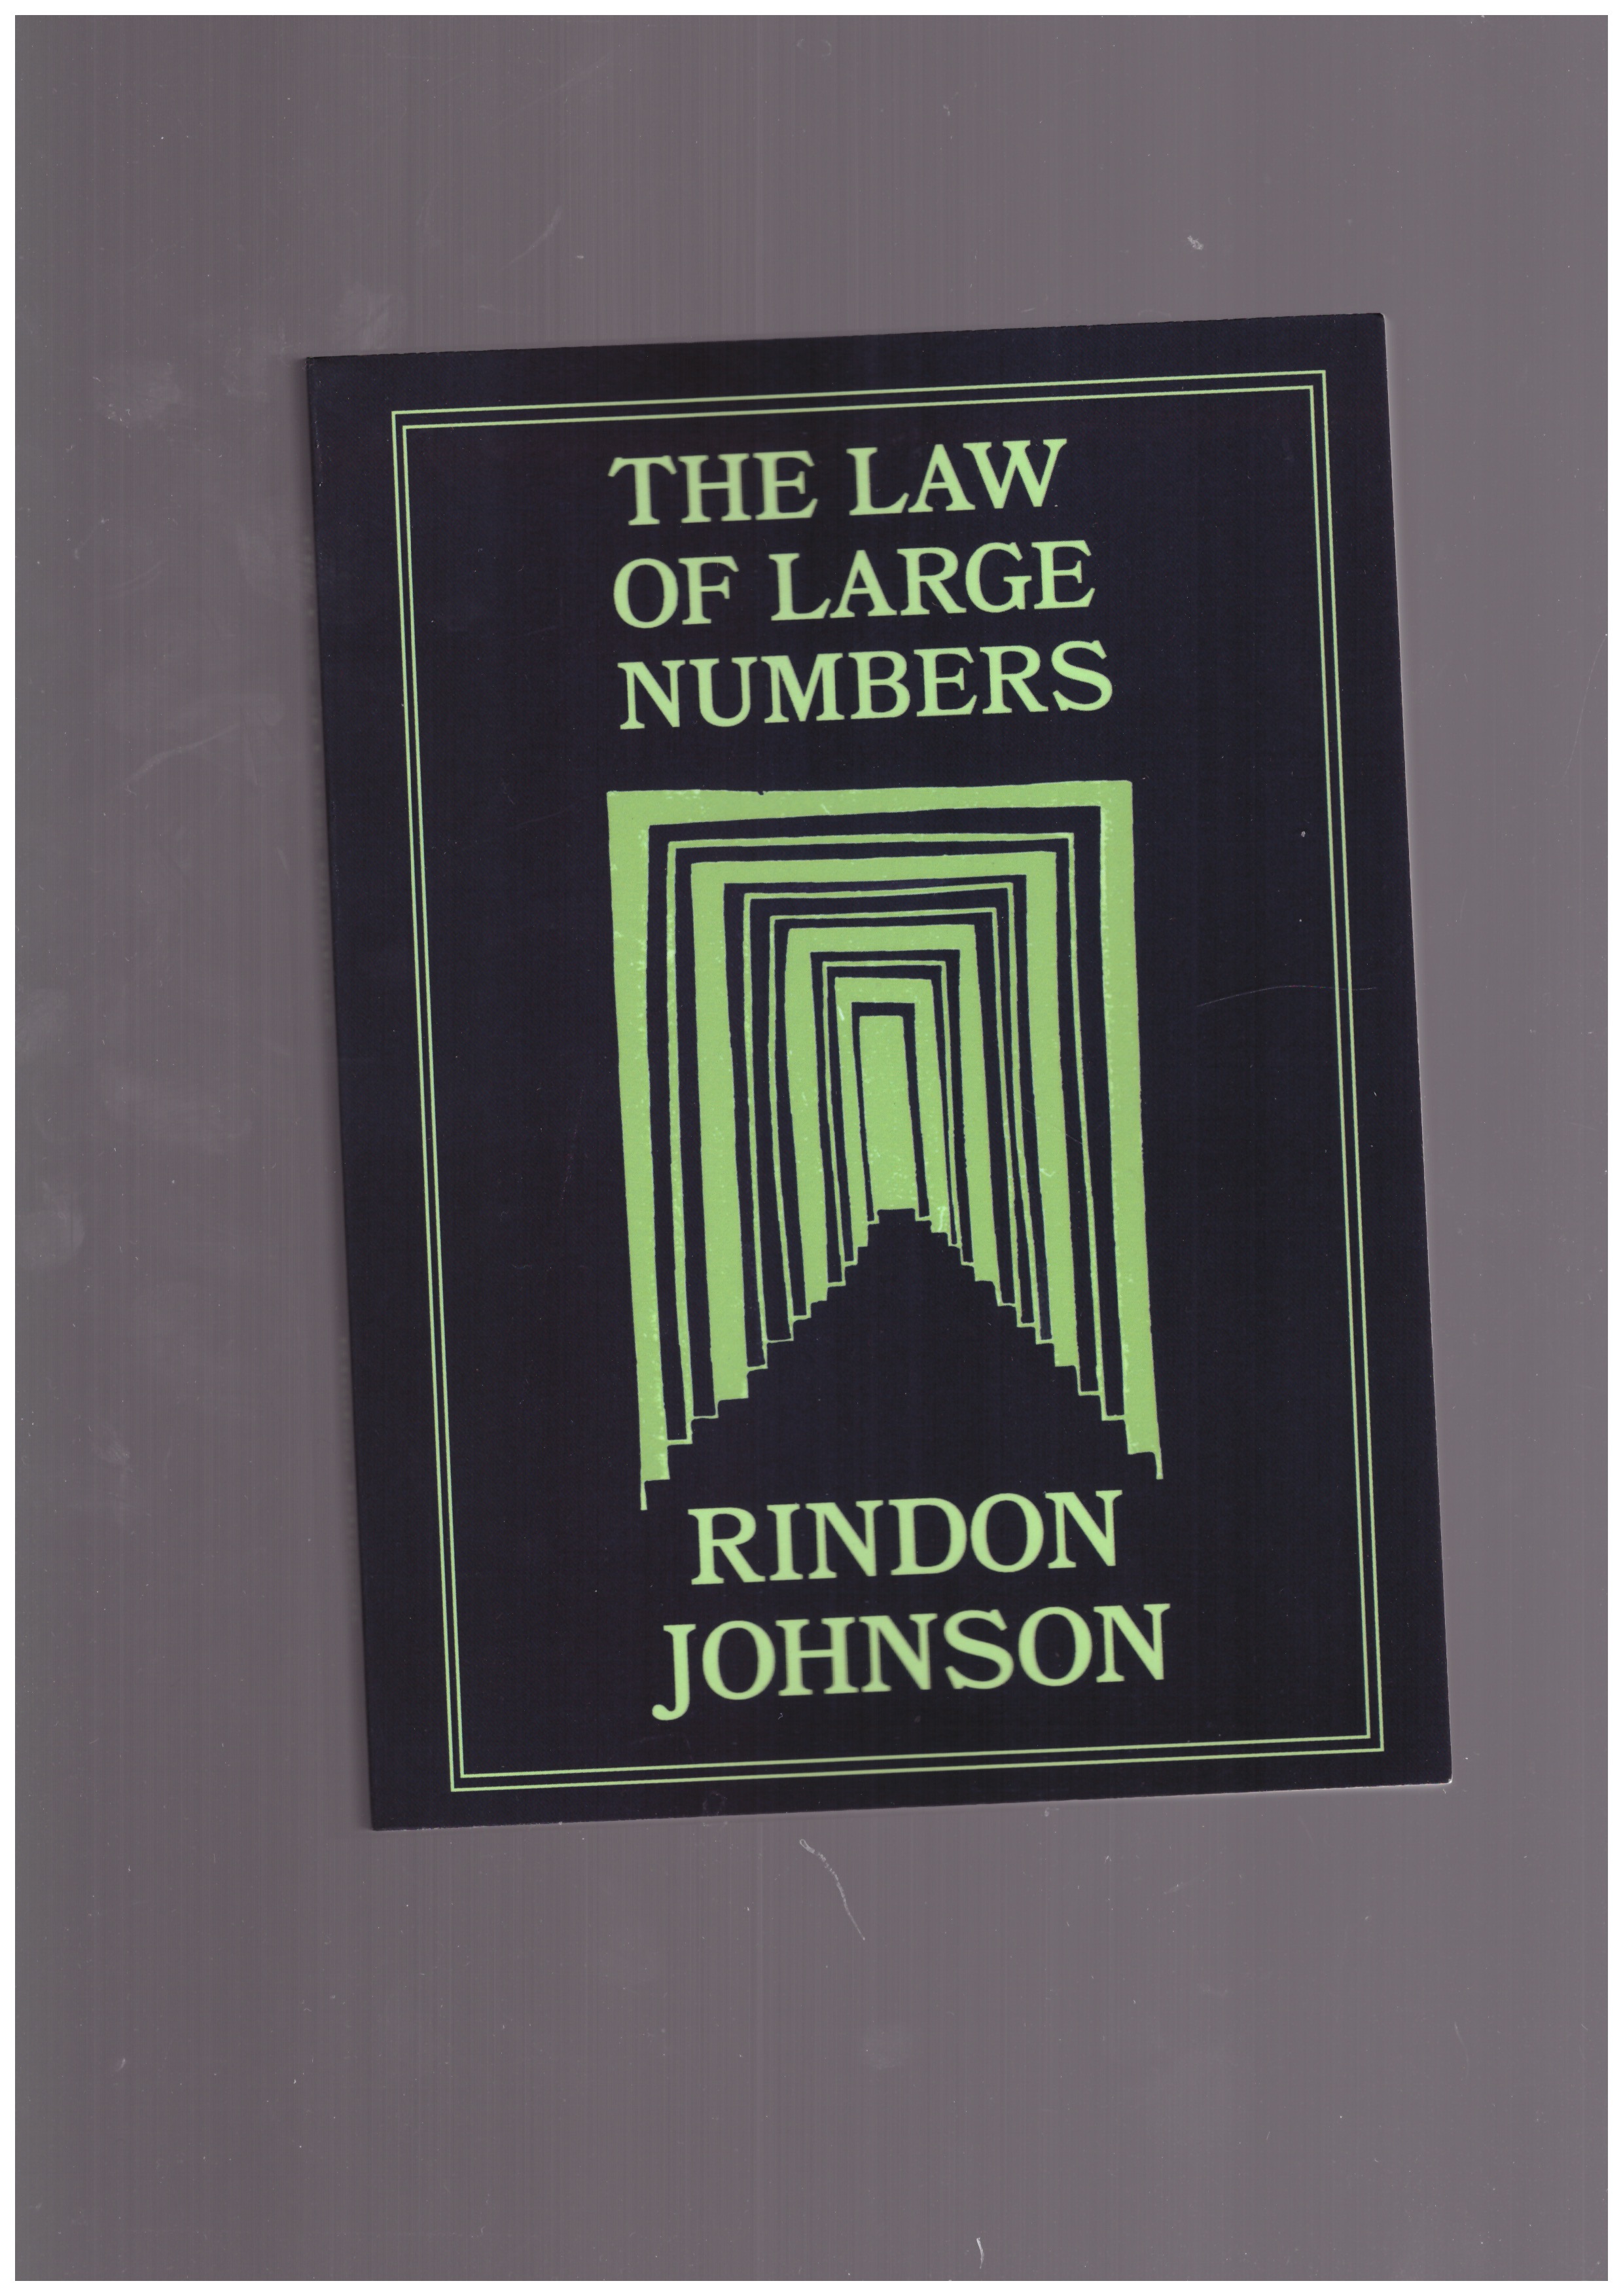 JOHNSON, Rindon - The Law of Large Numbers